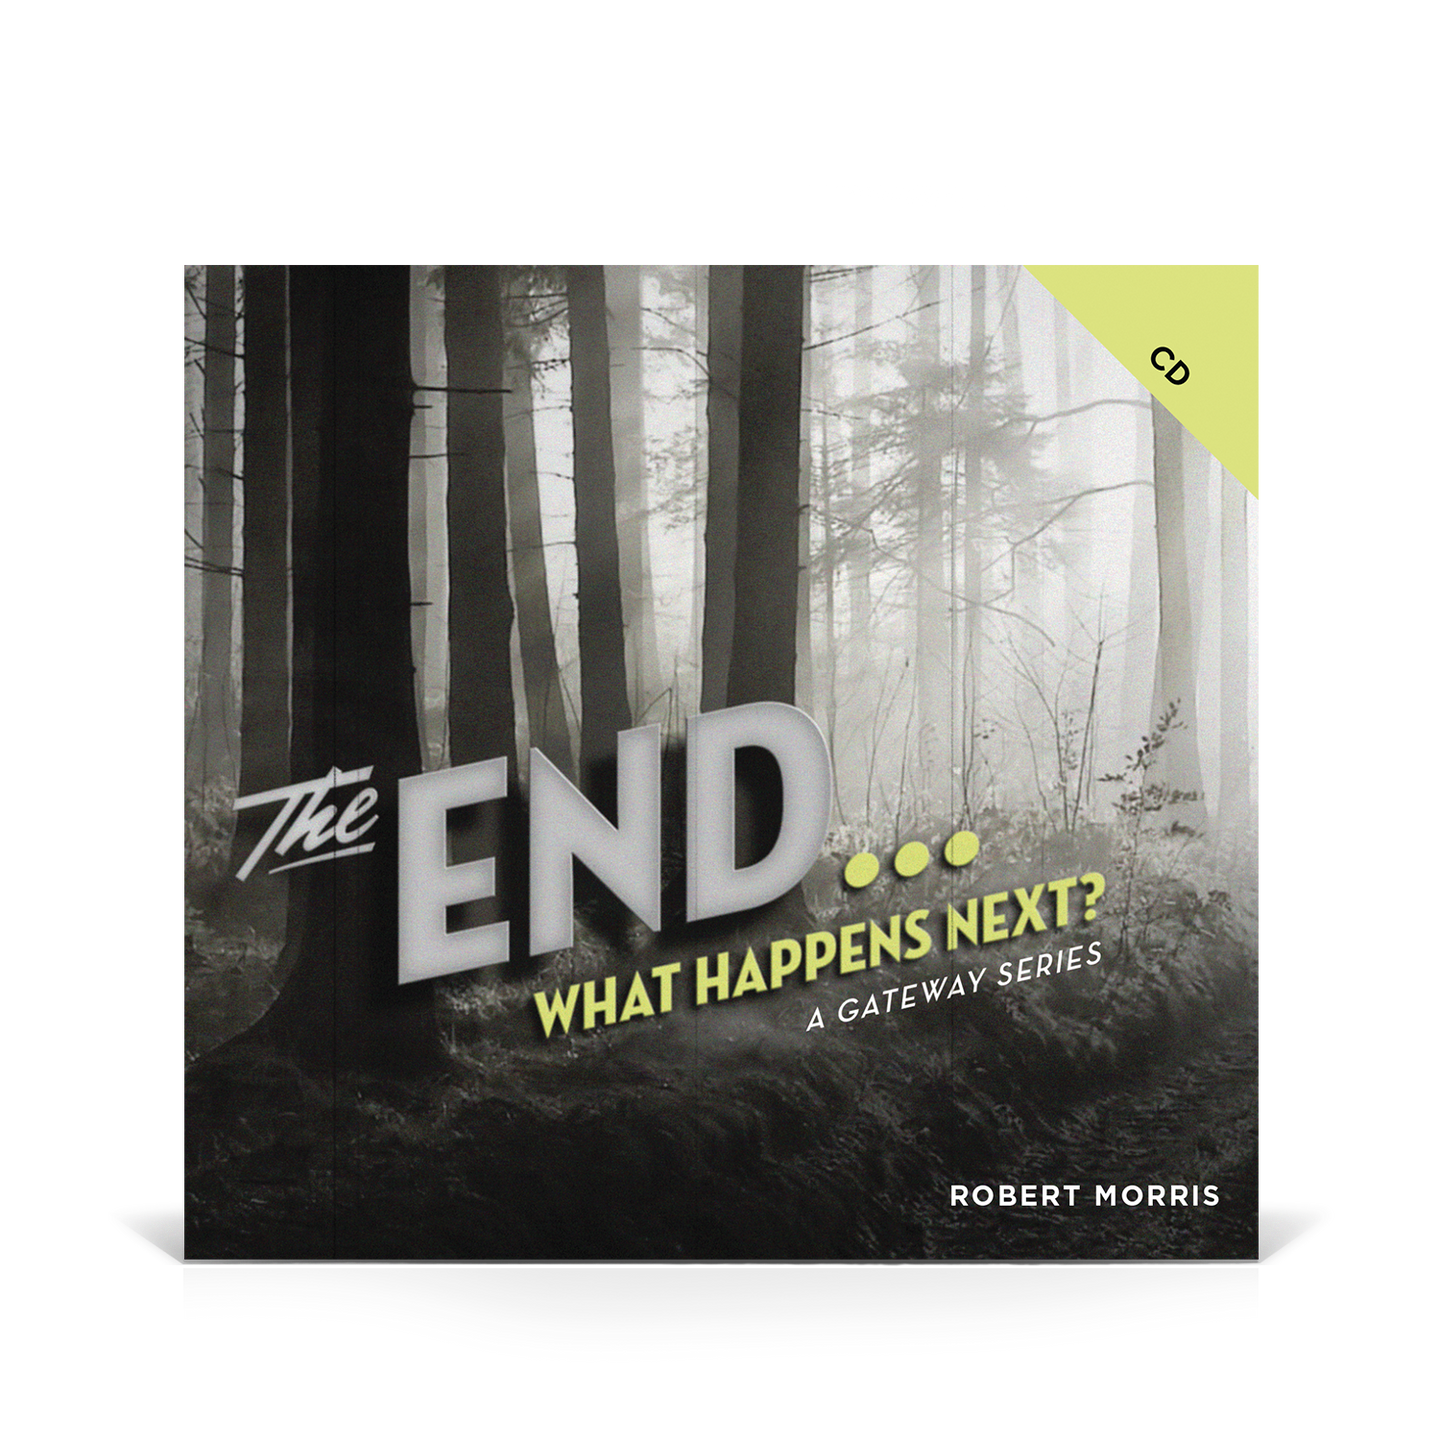 The End... What Happens Next? CD